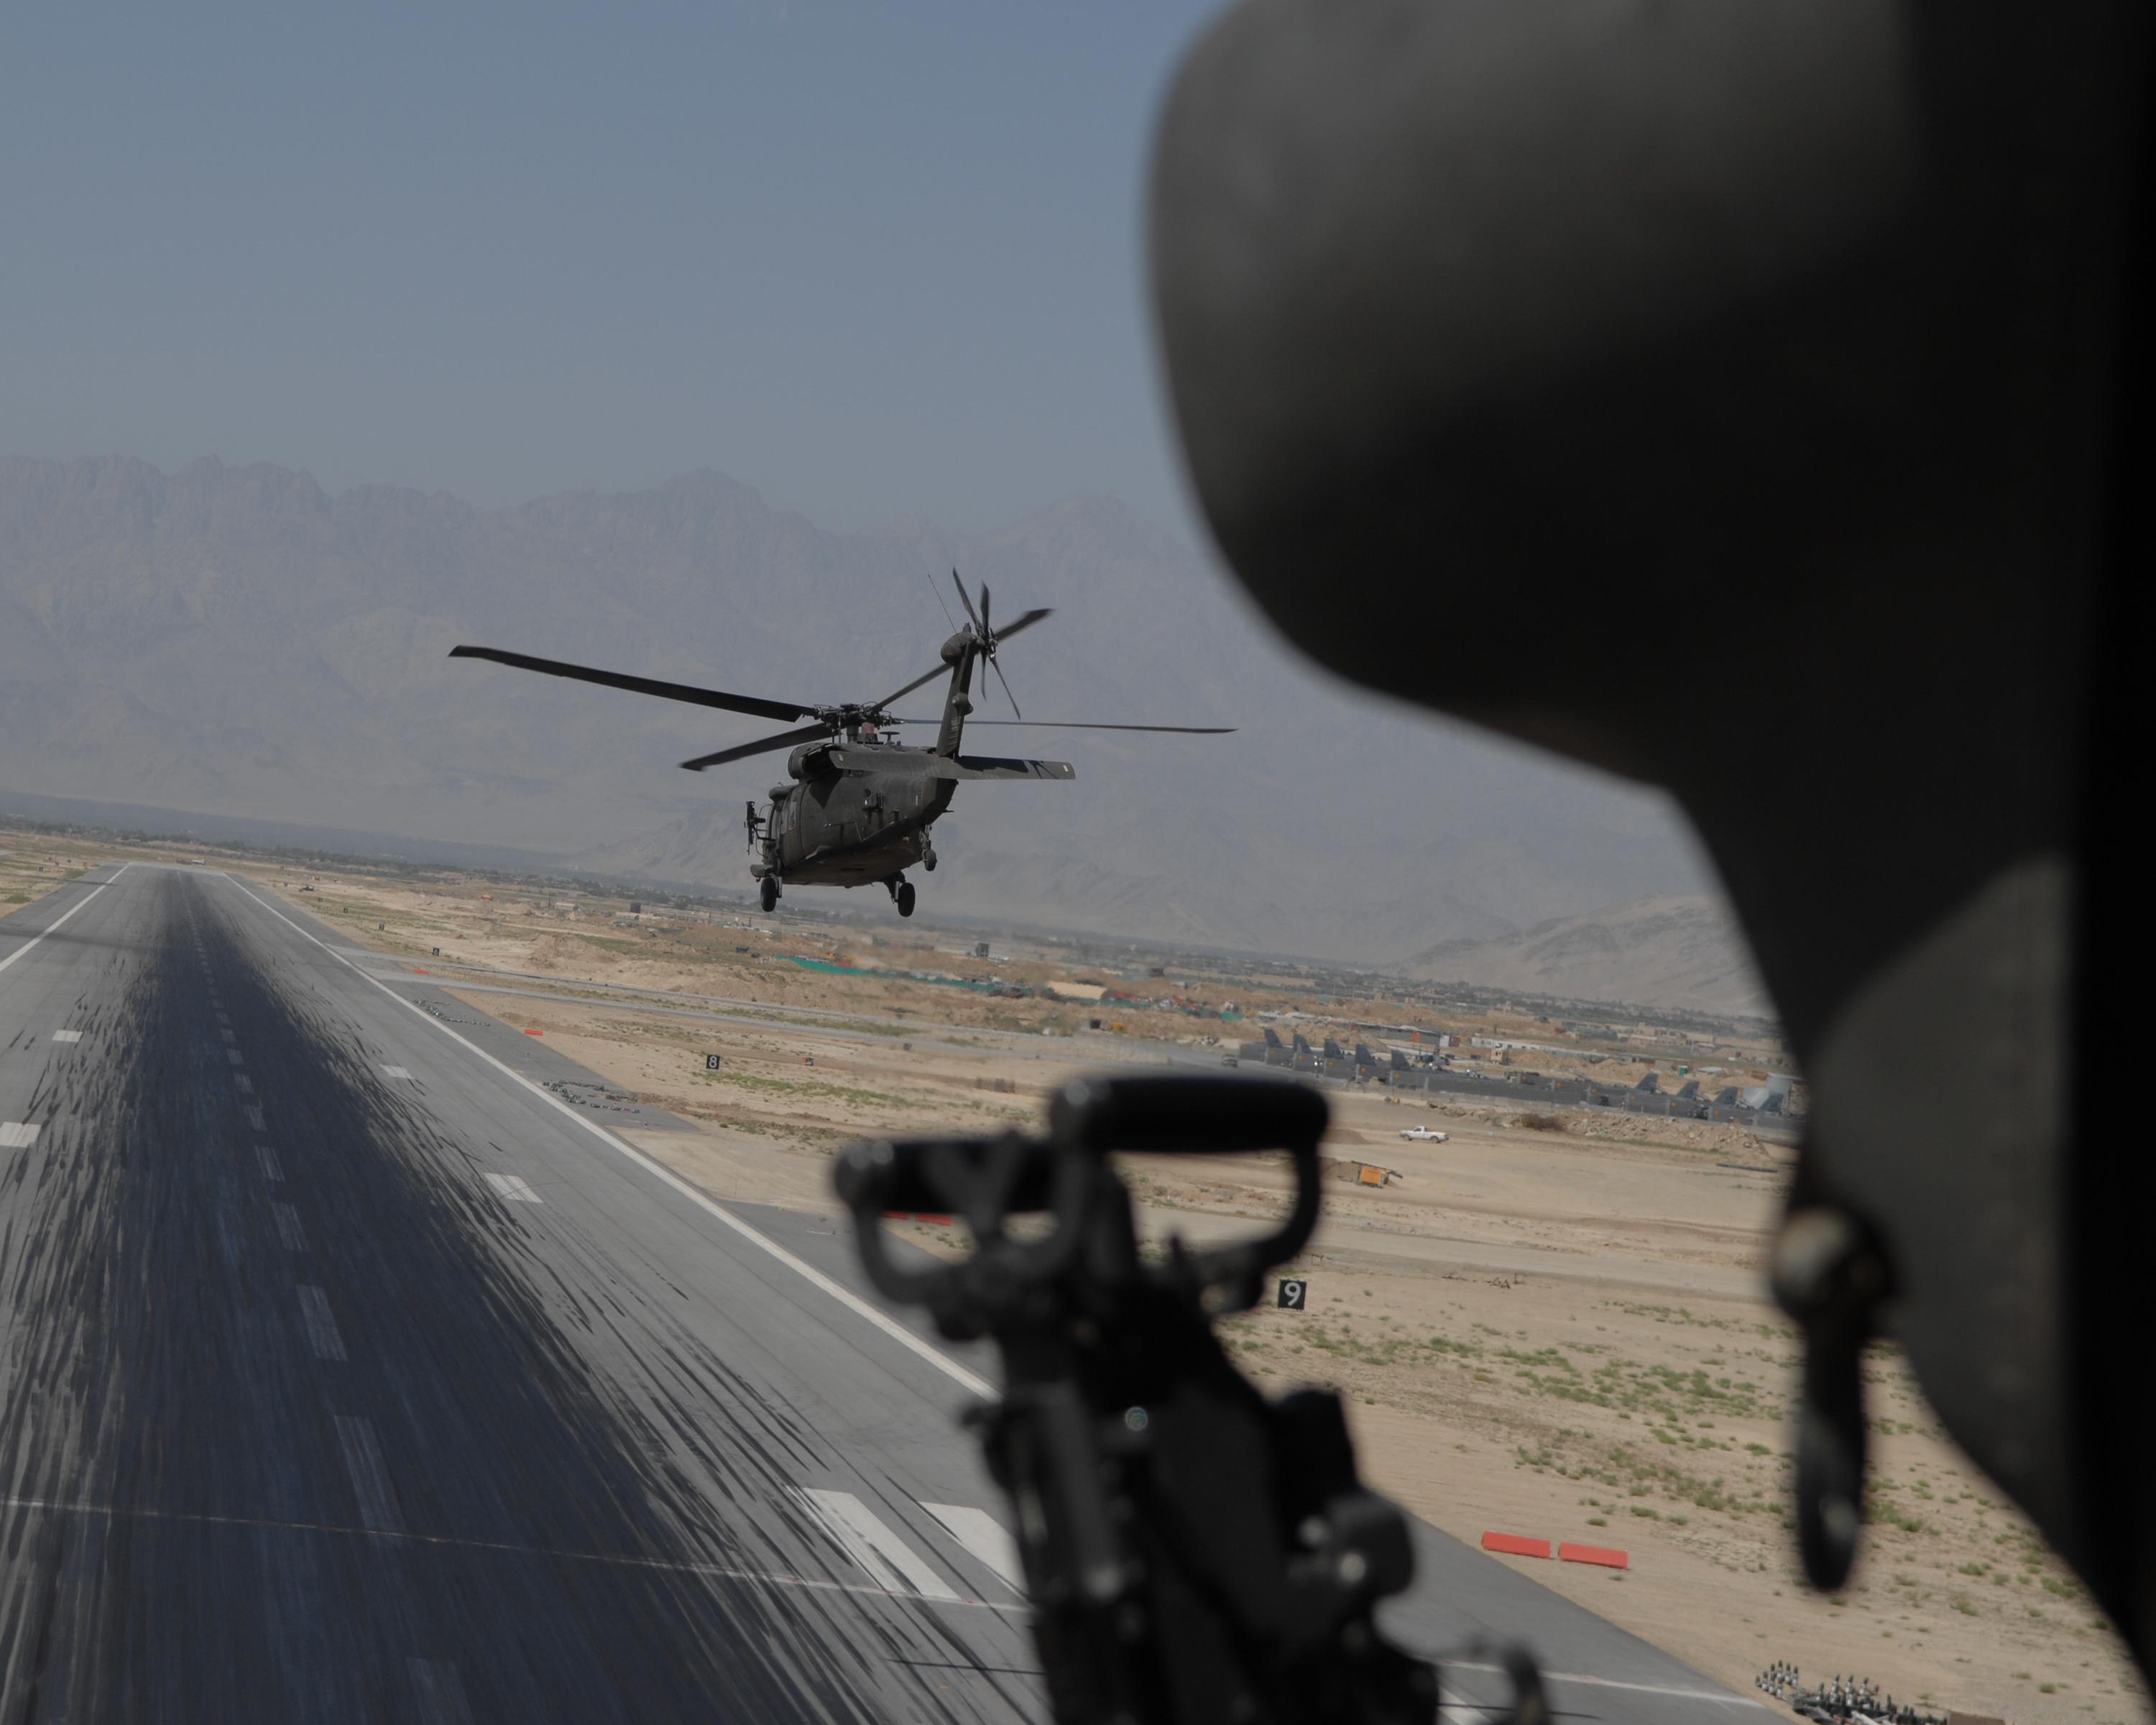 Helicopter taking off at Bagram